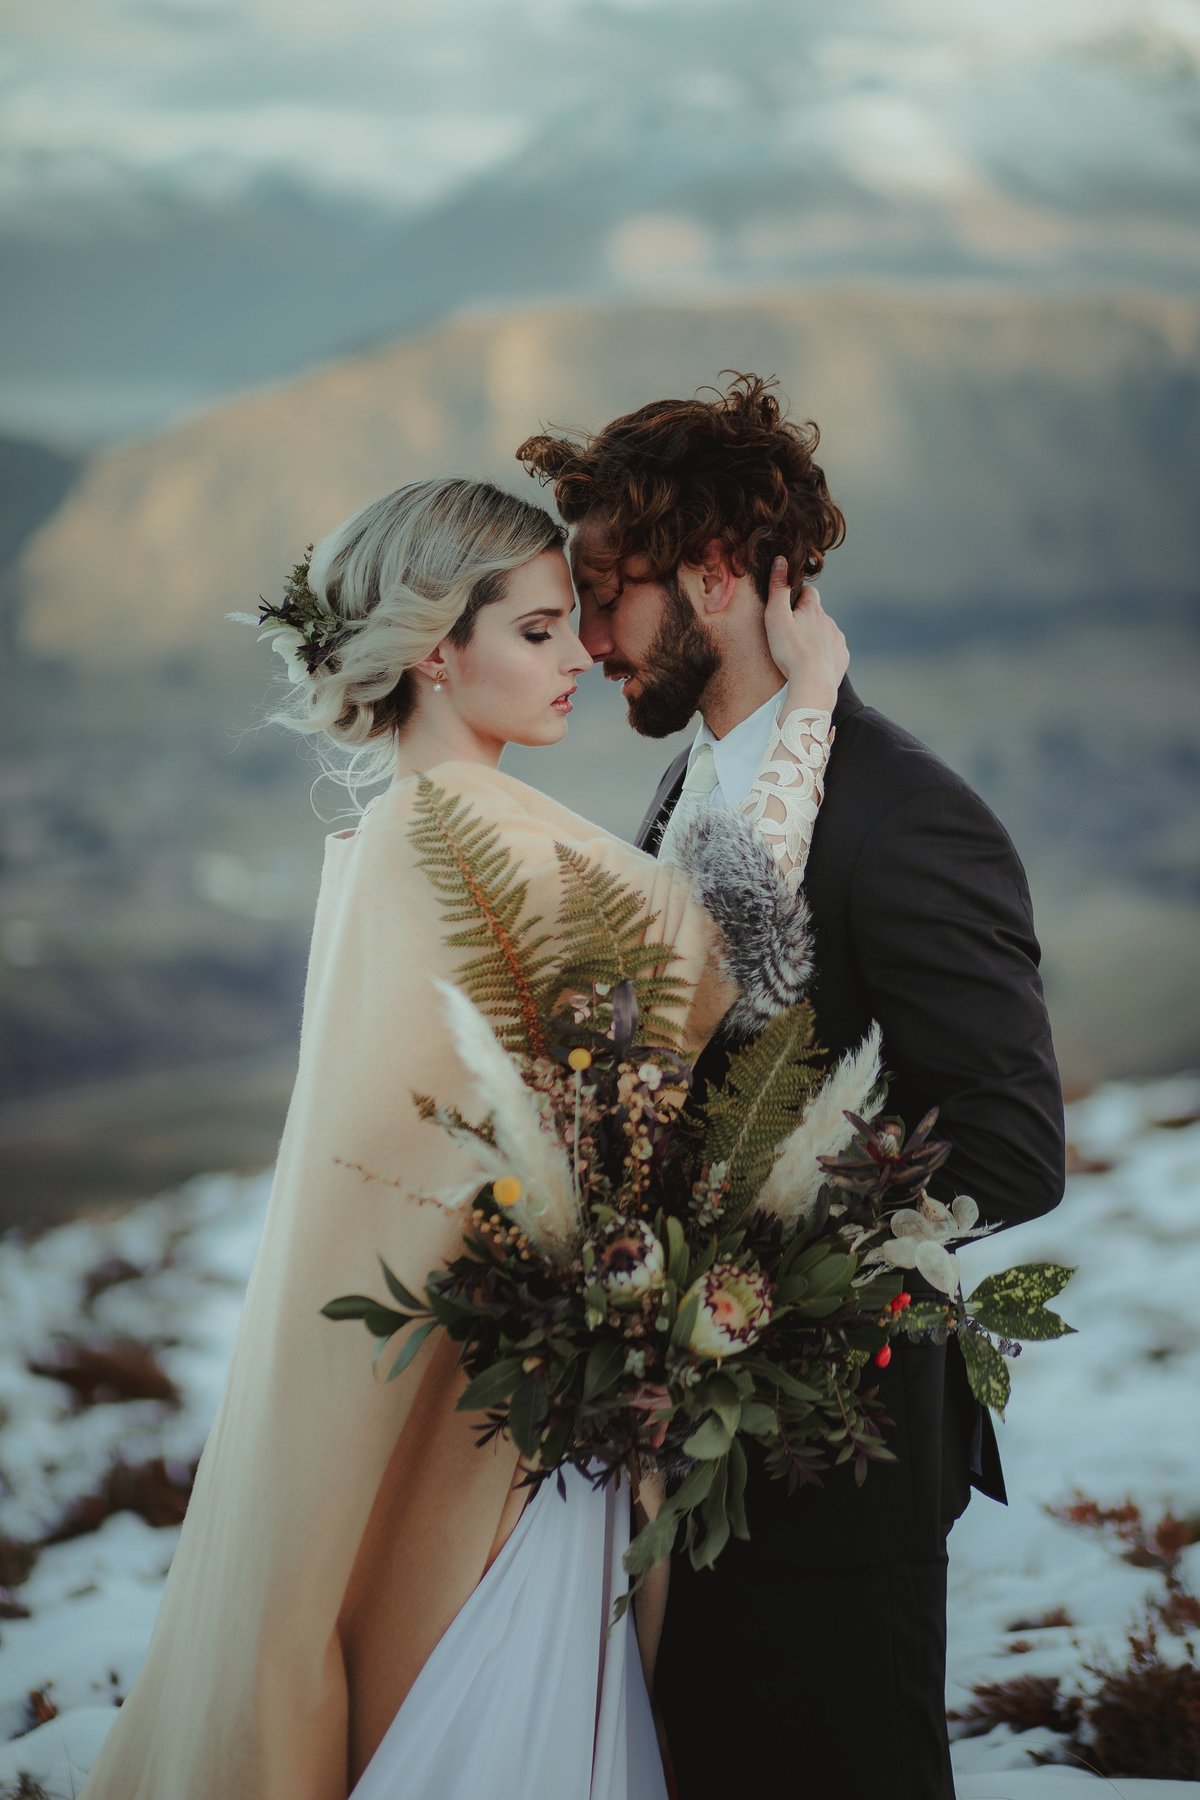 Bride and Groom holding each other close surrounded by snow